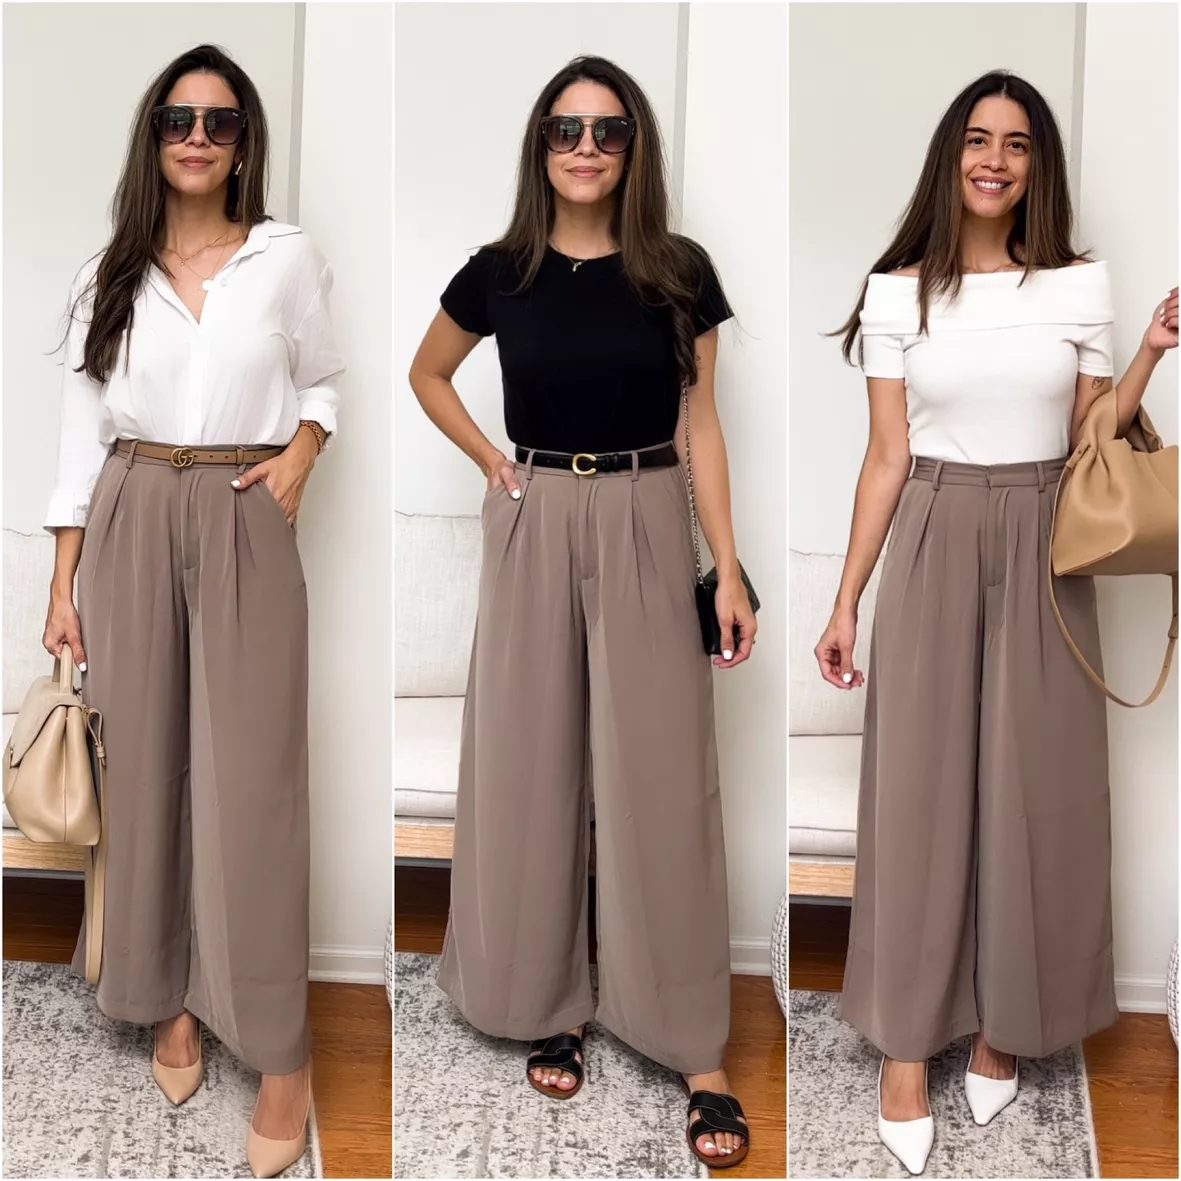 Palazzo Pants (The Perfect Comfy Pants to Dress Up or Down!)